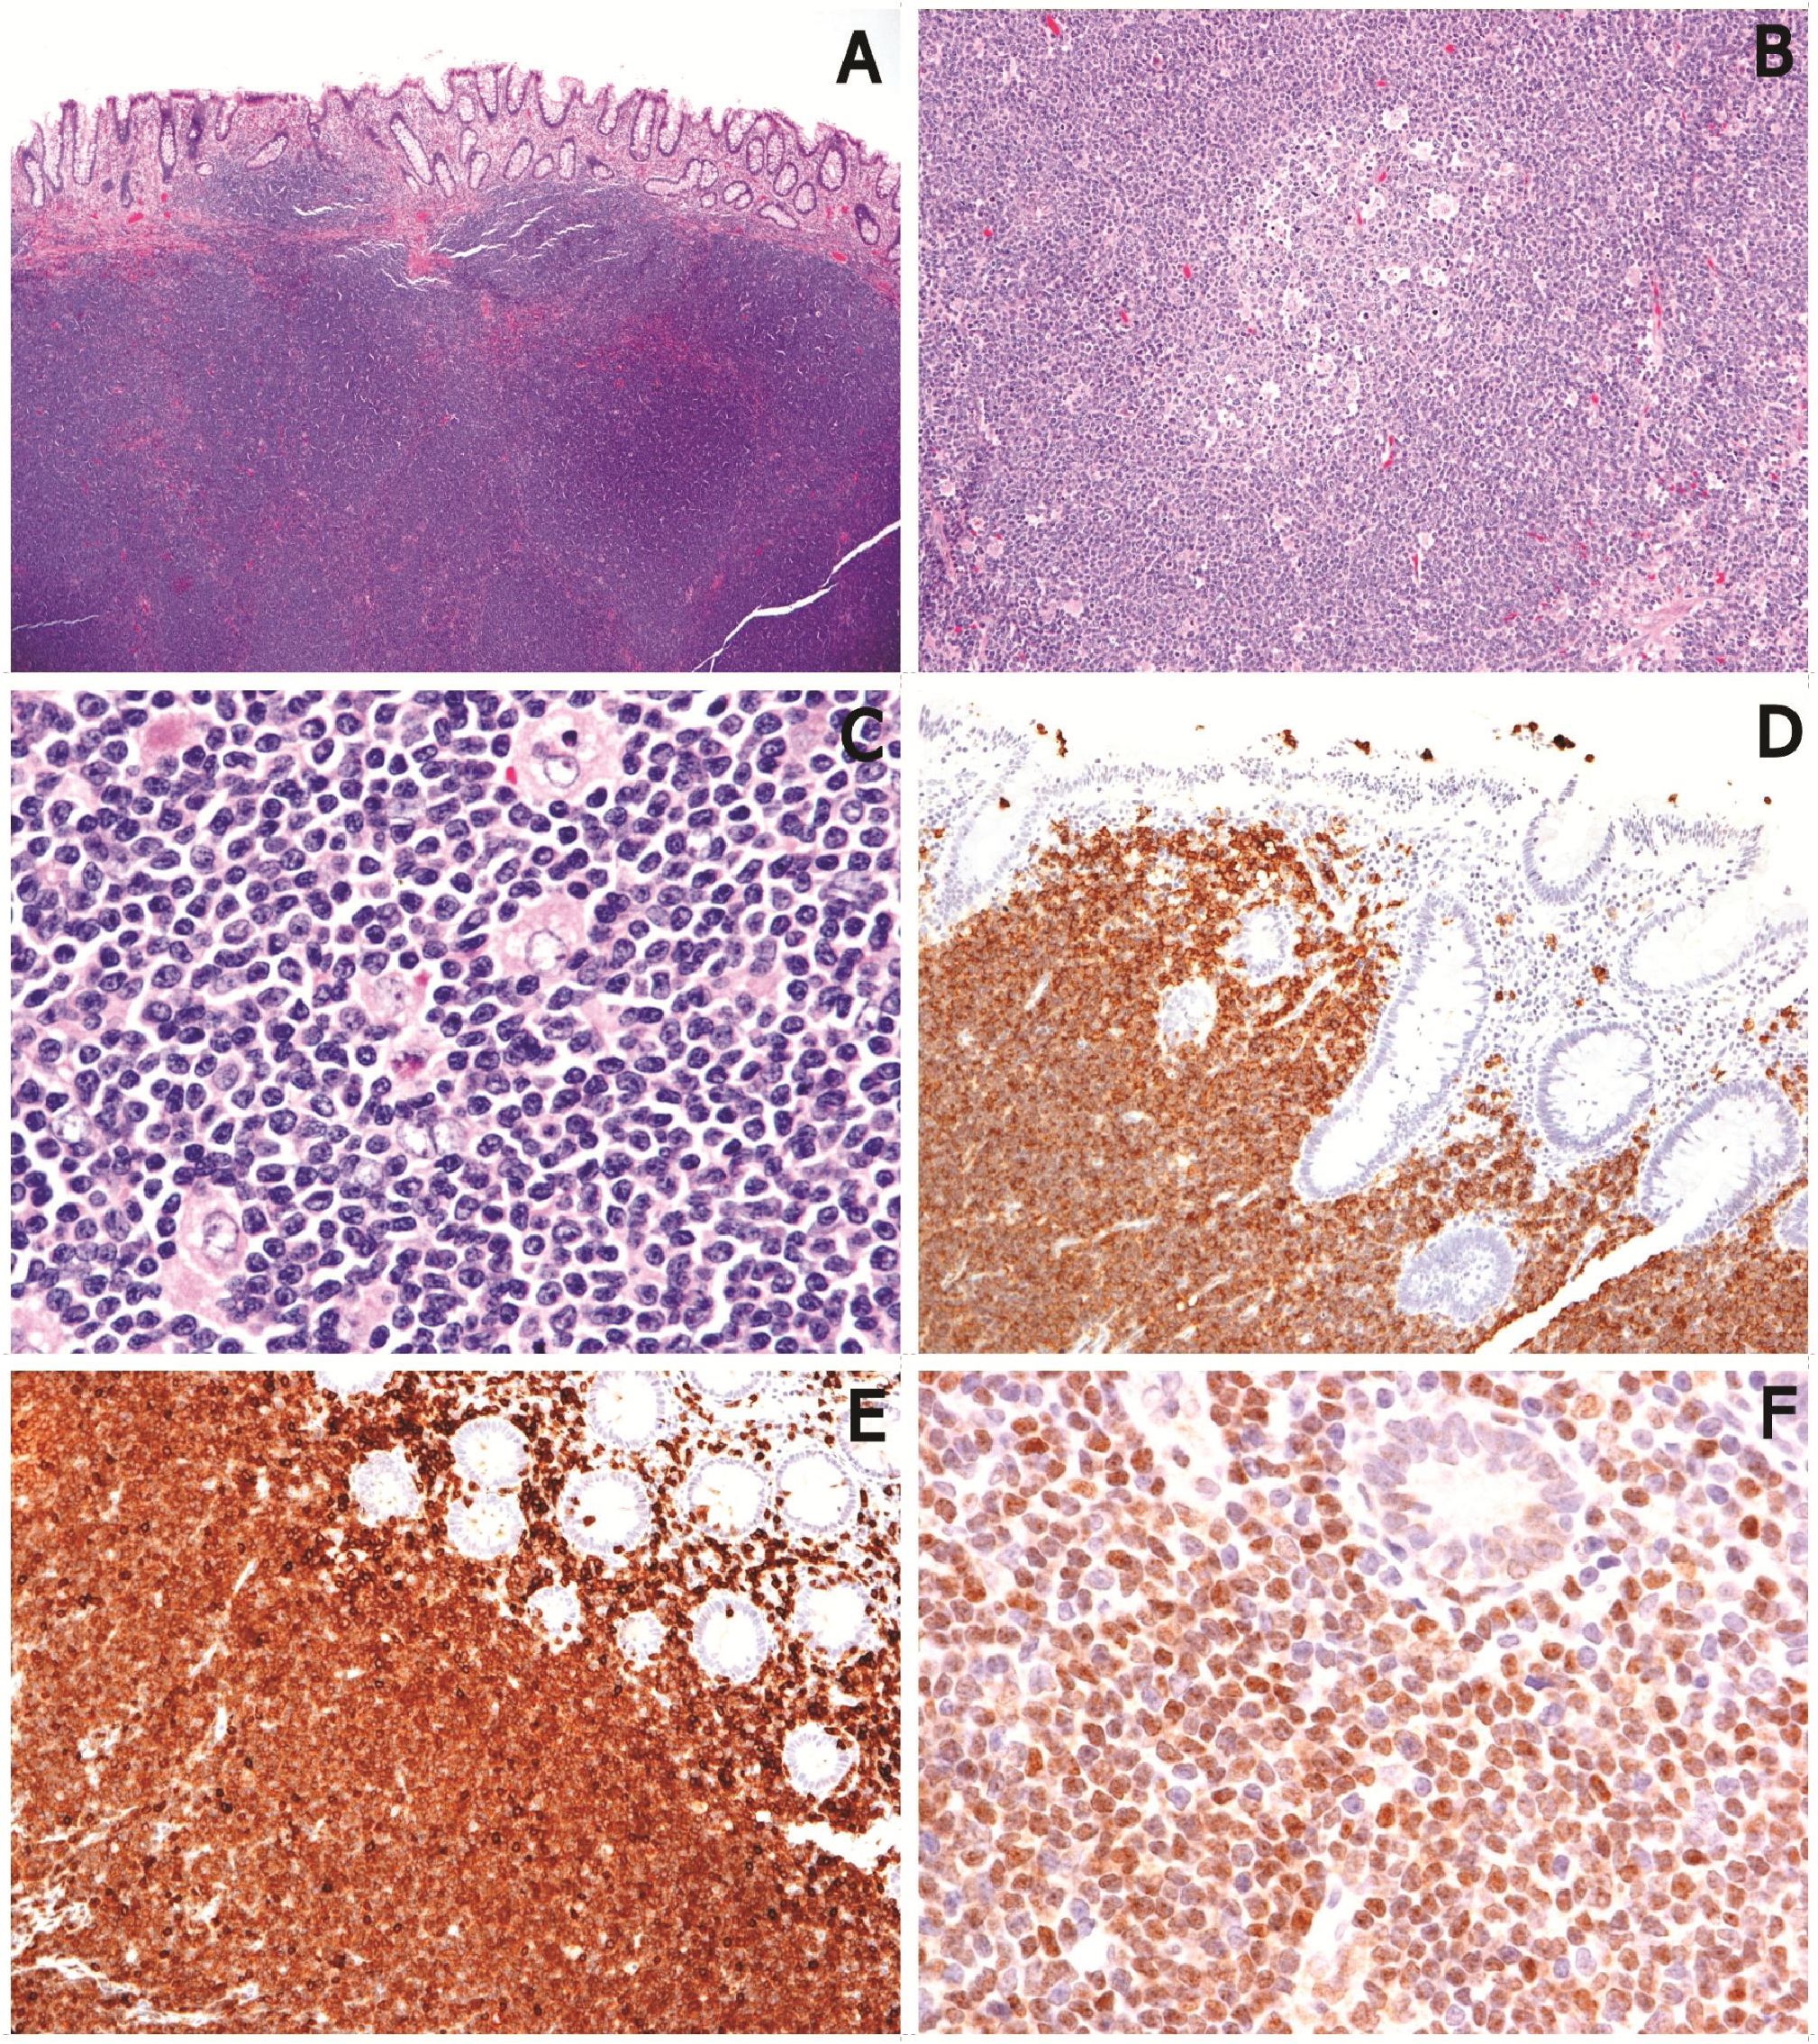 Mantle Cell Lymphoma Presenting As Multiple Lymphomatous Polyposis Of